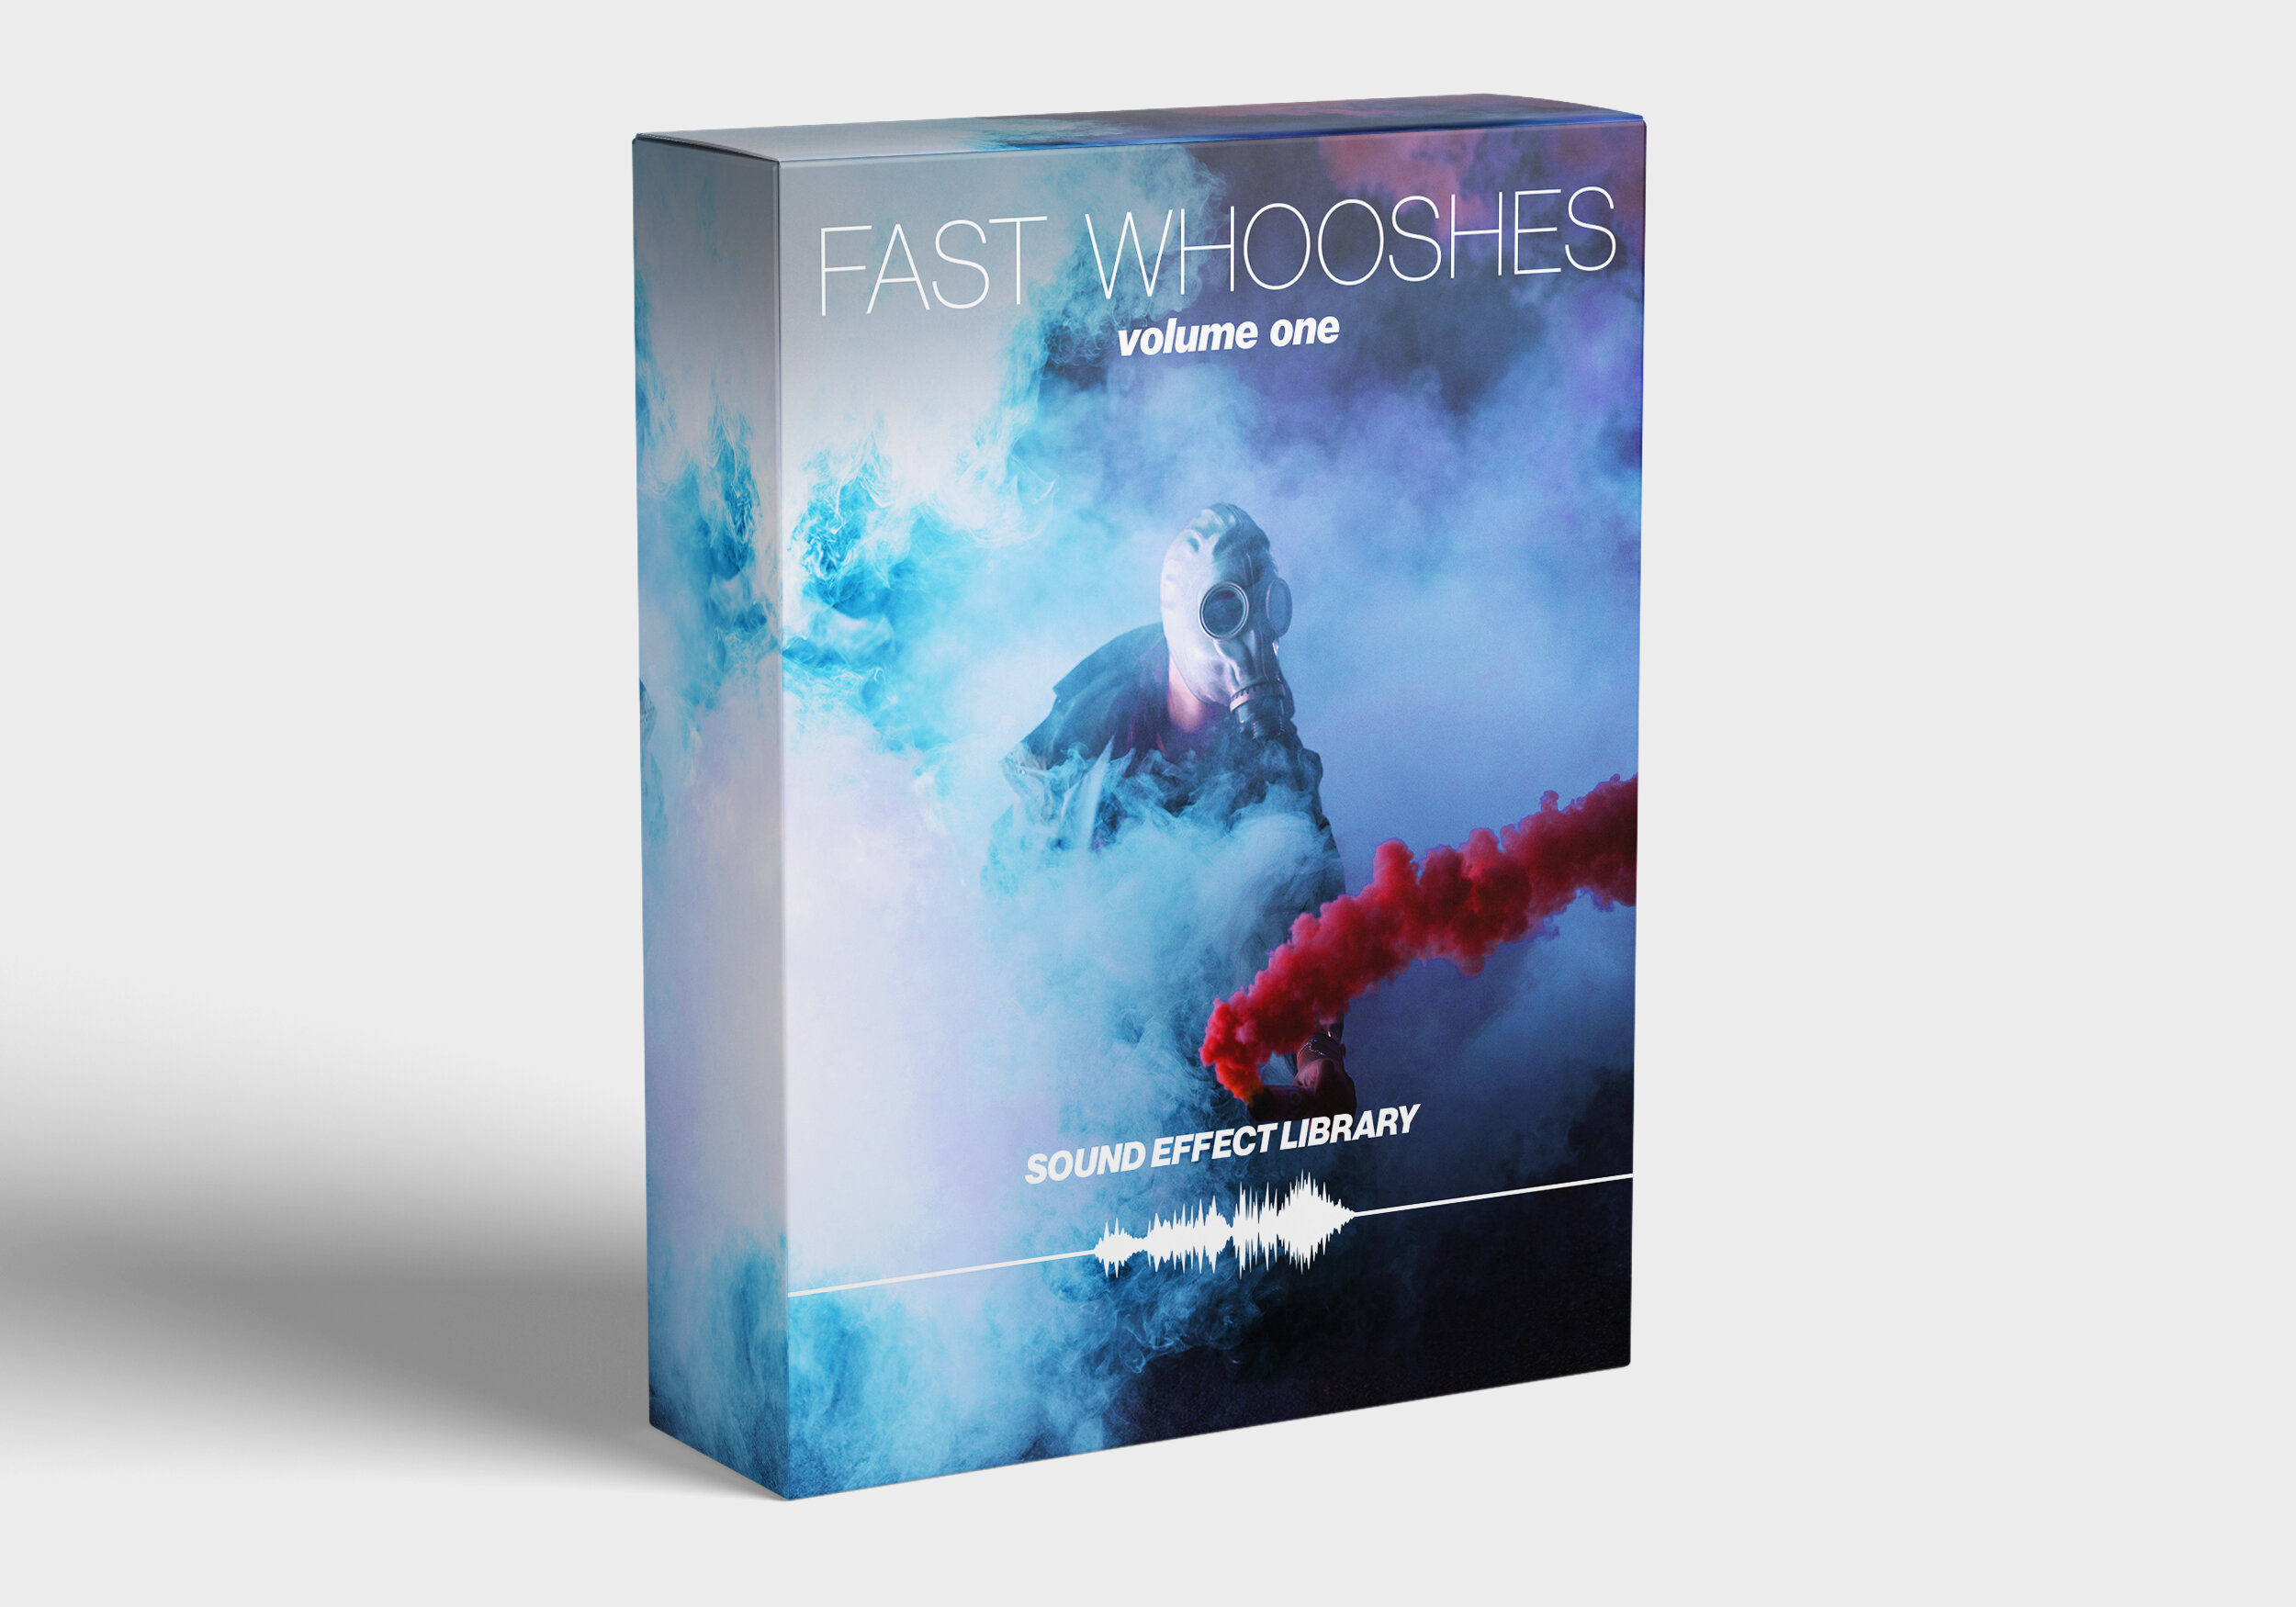 Woosh 2 royalty free audio. Audio of pass, profile, effects - 183435241